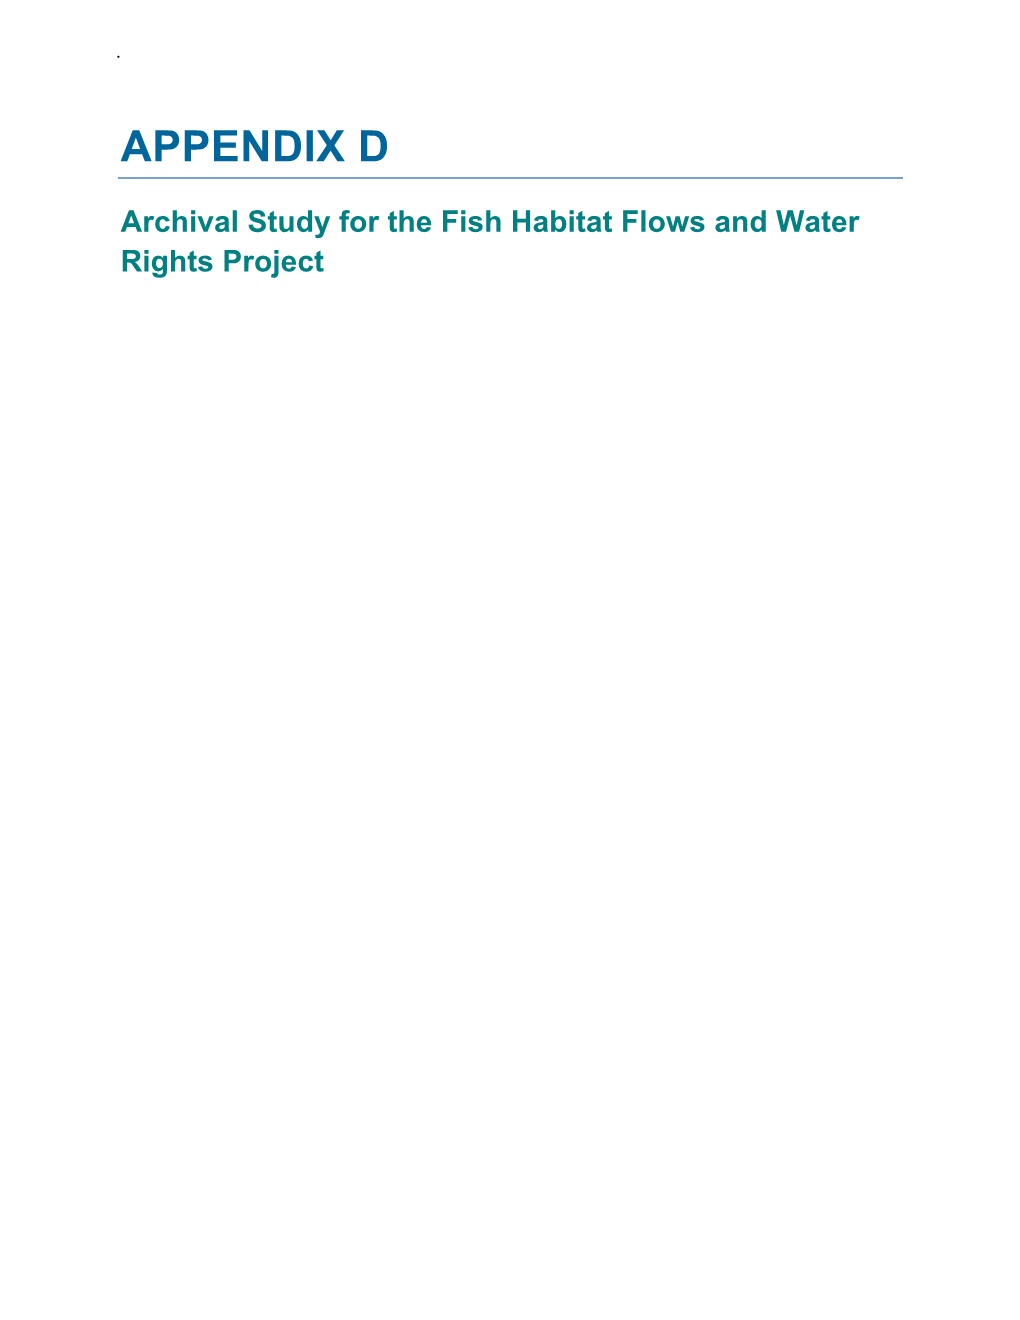 Archival Study for the Fish Habitat Flows and Water Rights Project